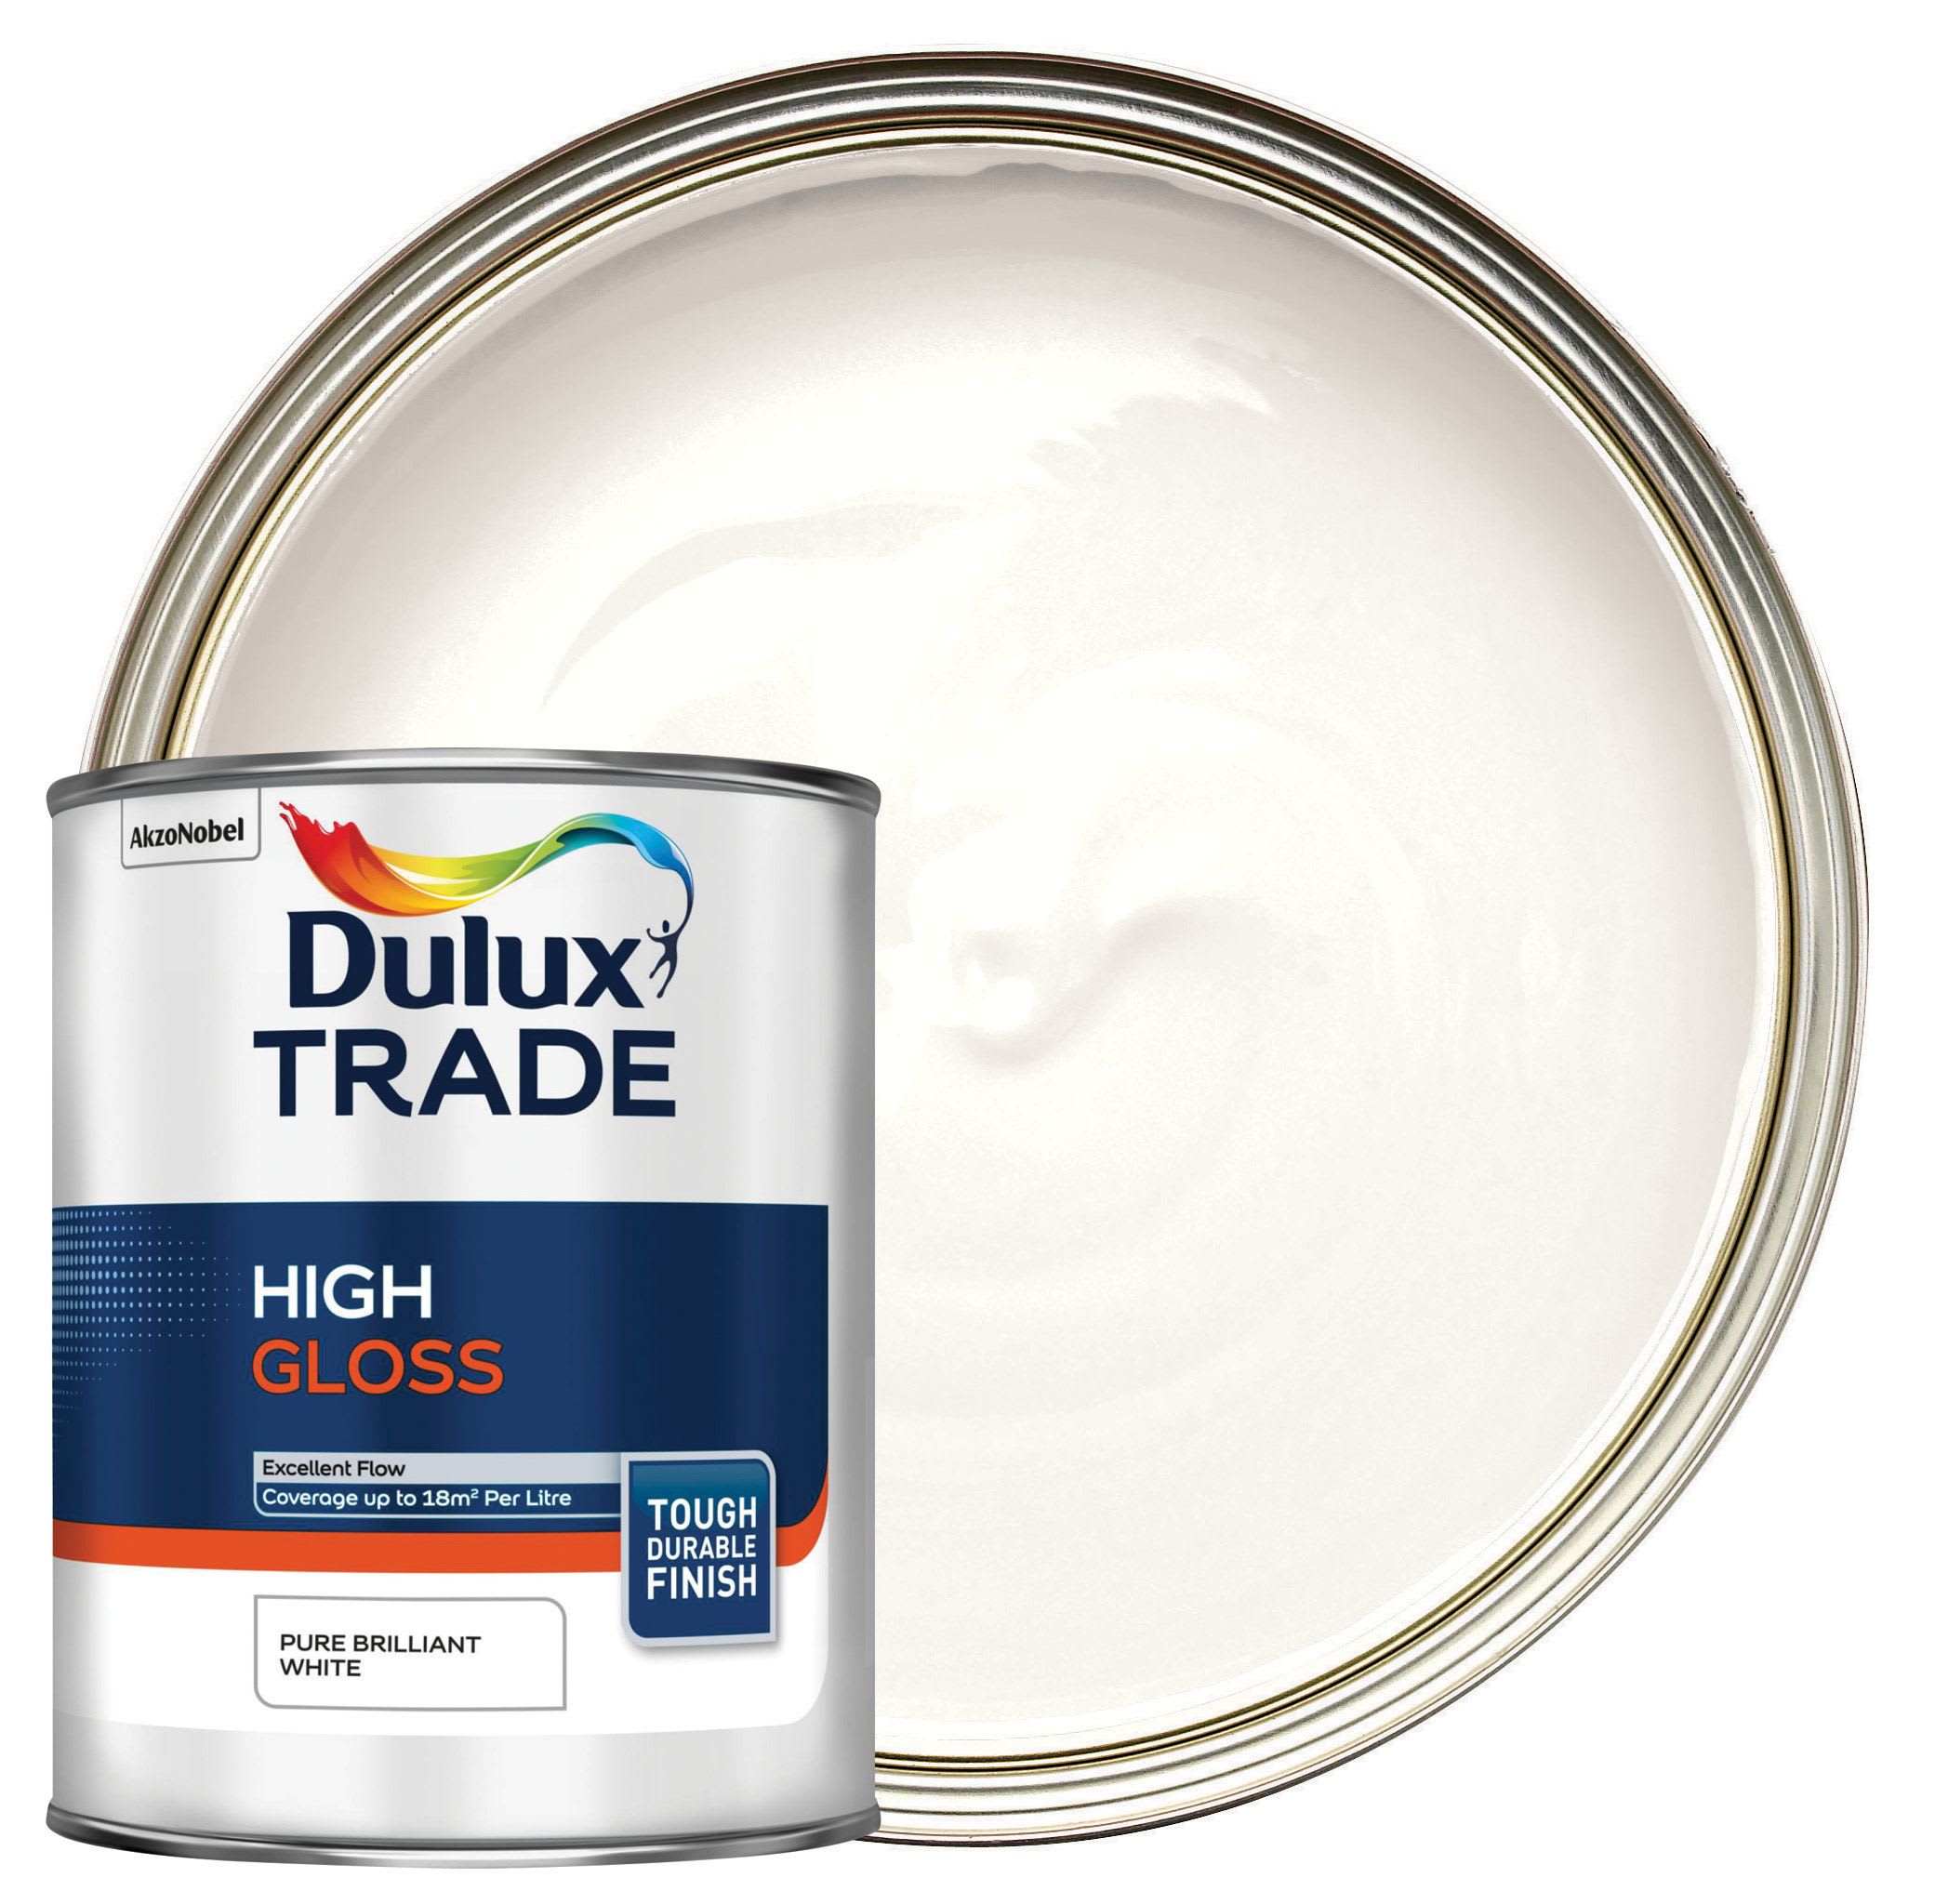 Dulux Trade High Gloss Paint - Pure Brilliant